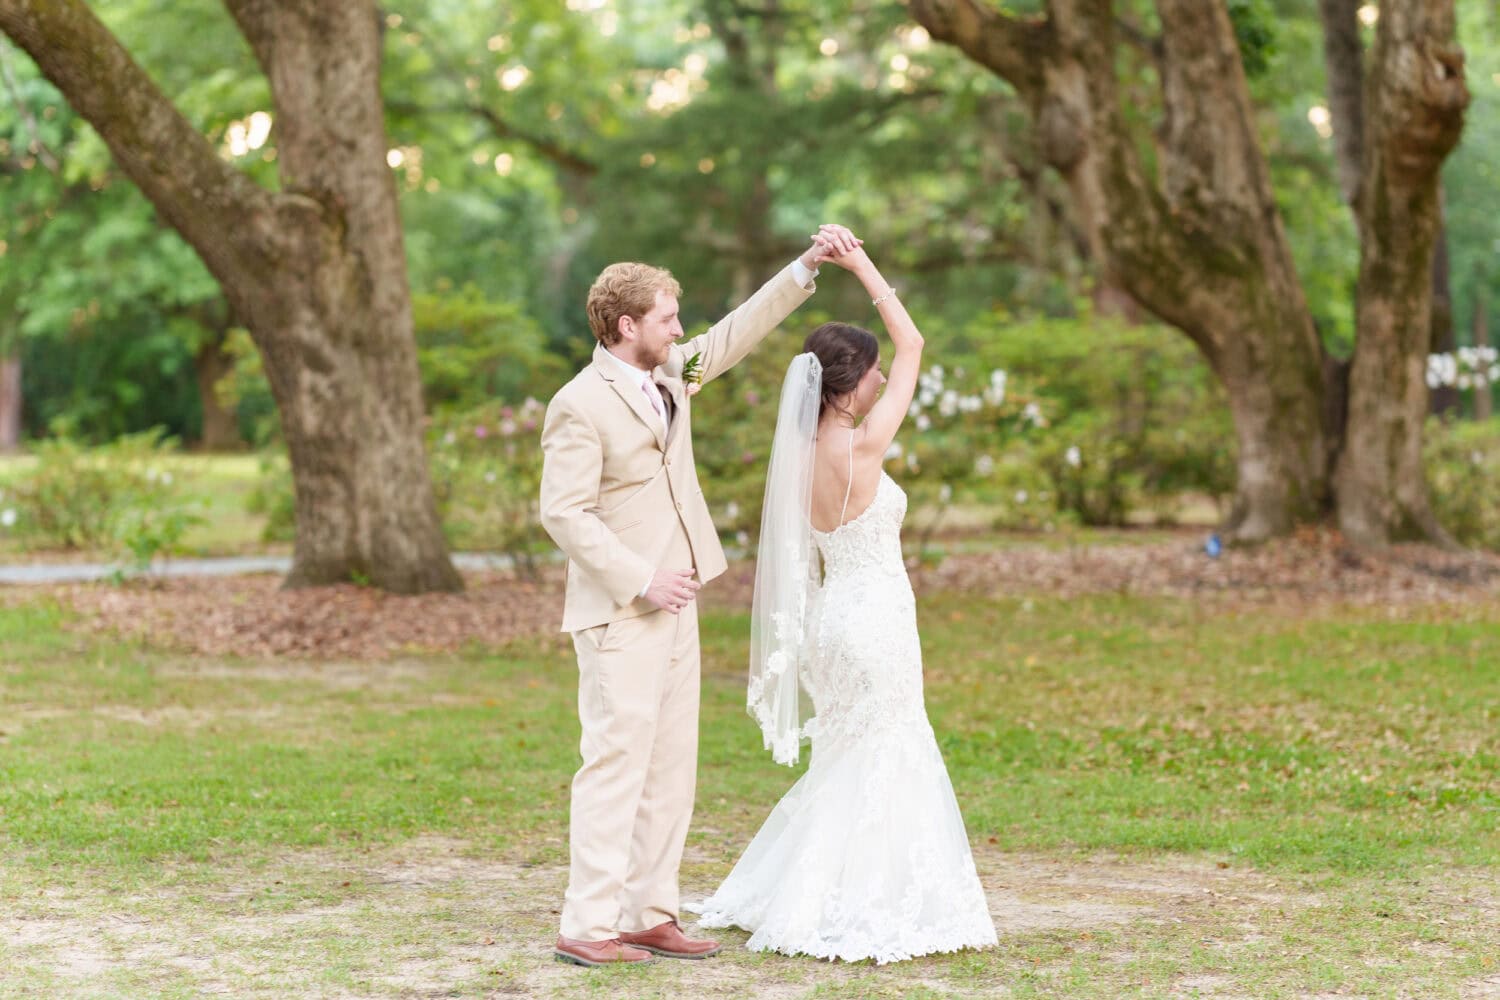 Spinning his bride - Tanglewood Plantation